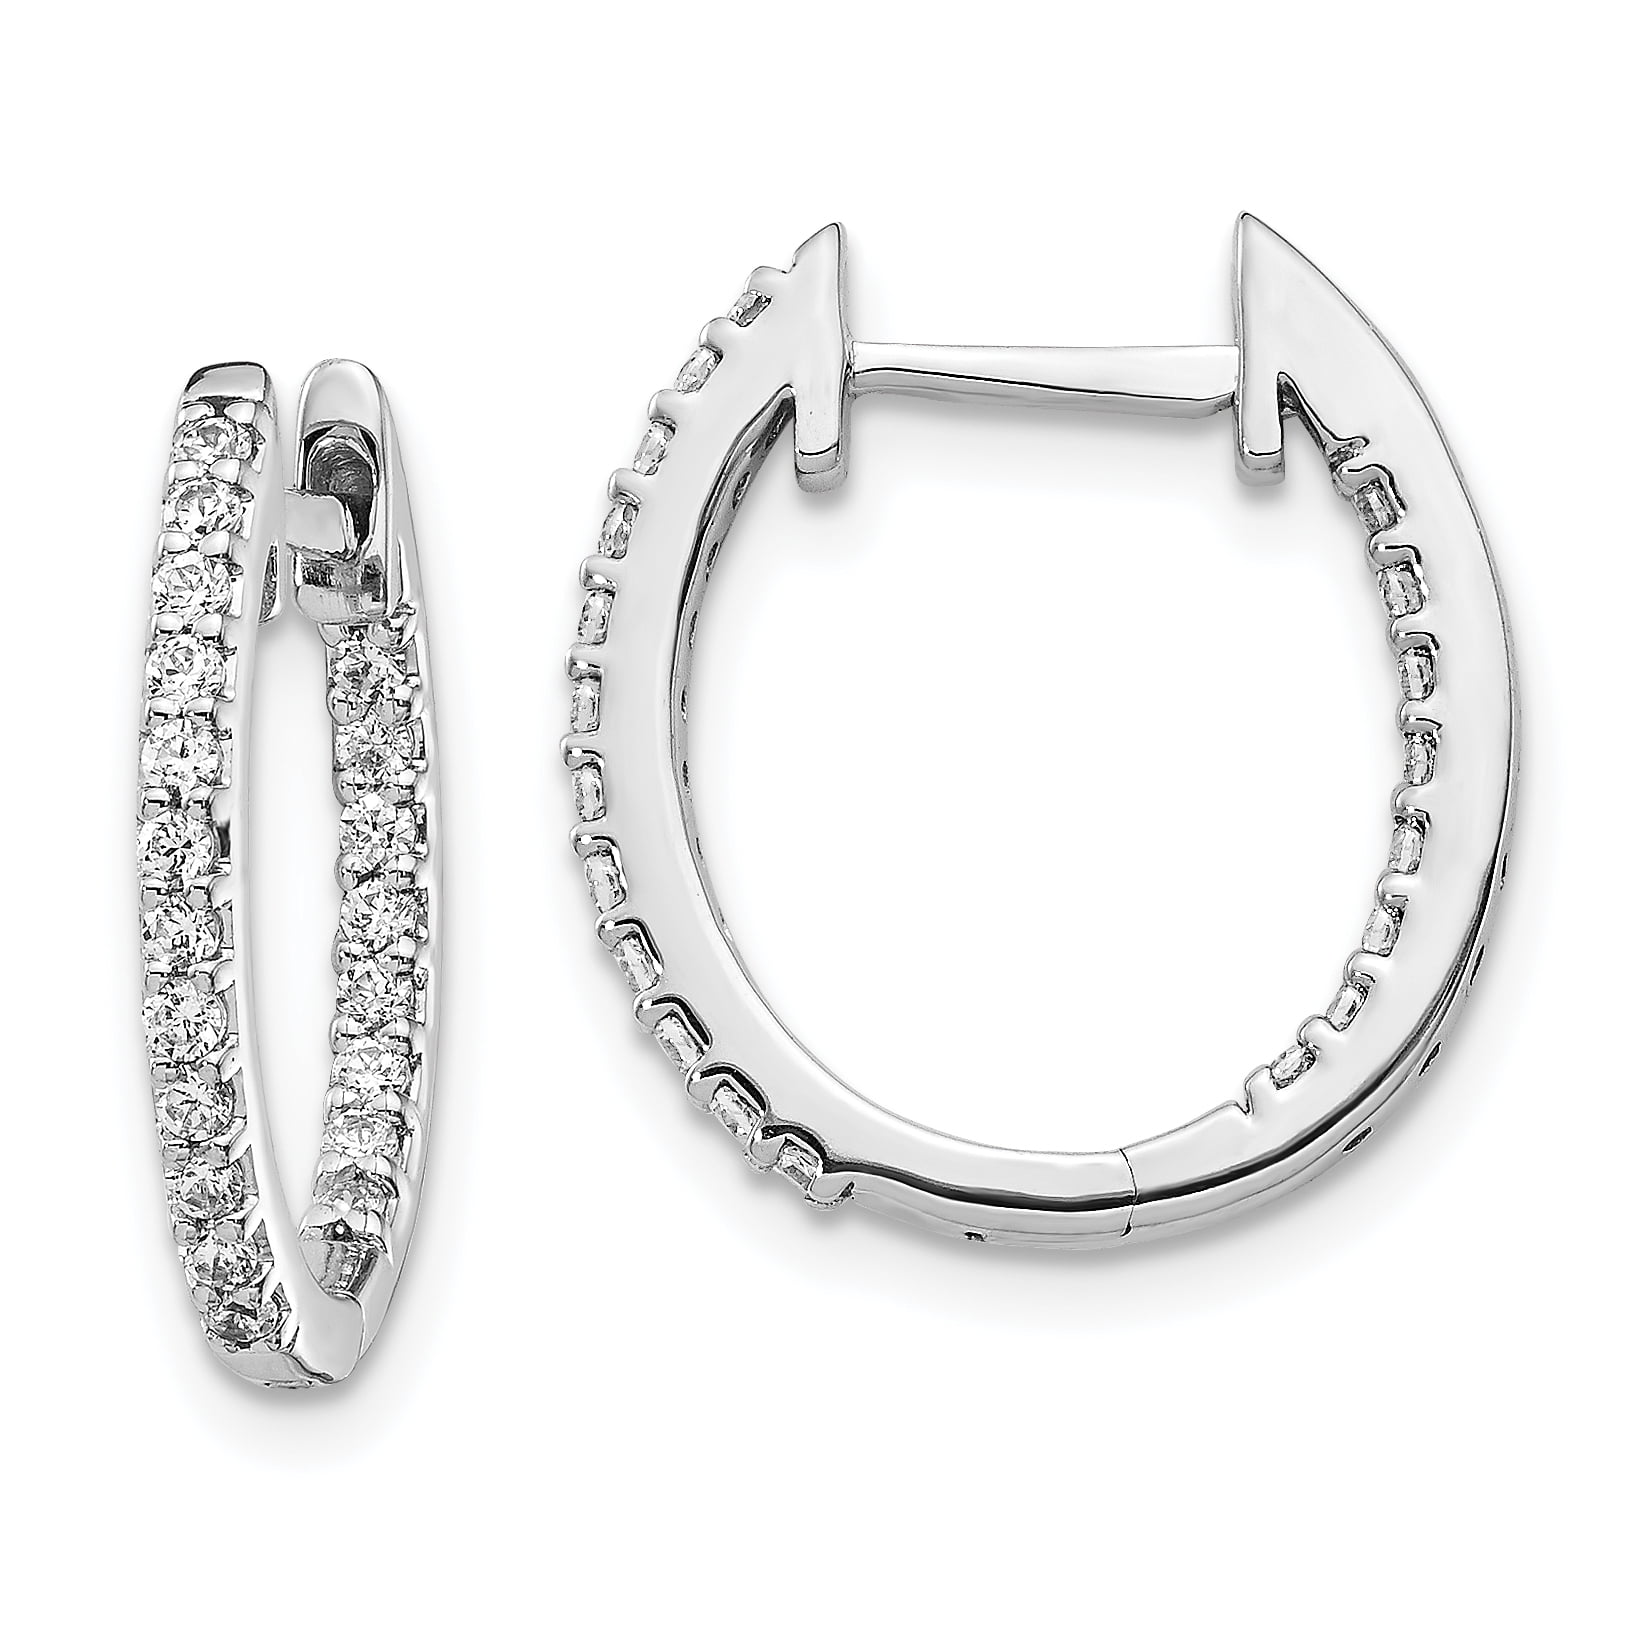 14K White Gold Textured and Polished 17mm Hinged Hoop Earrings 